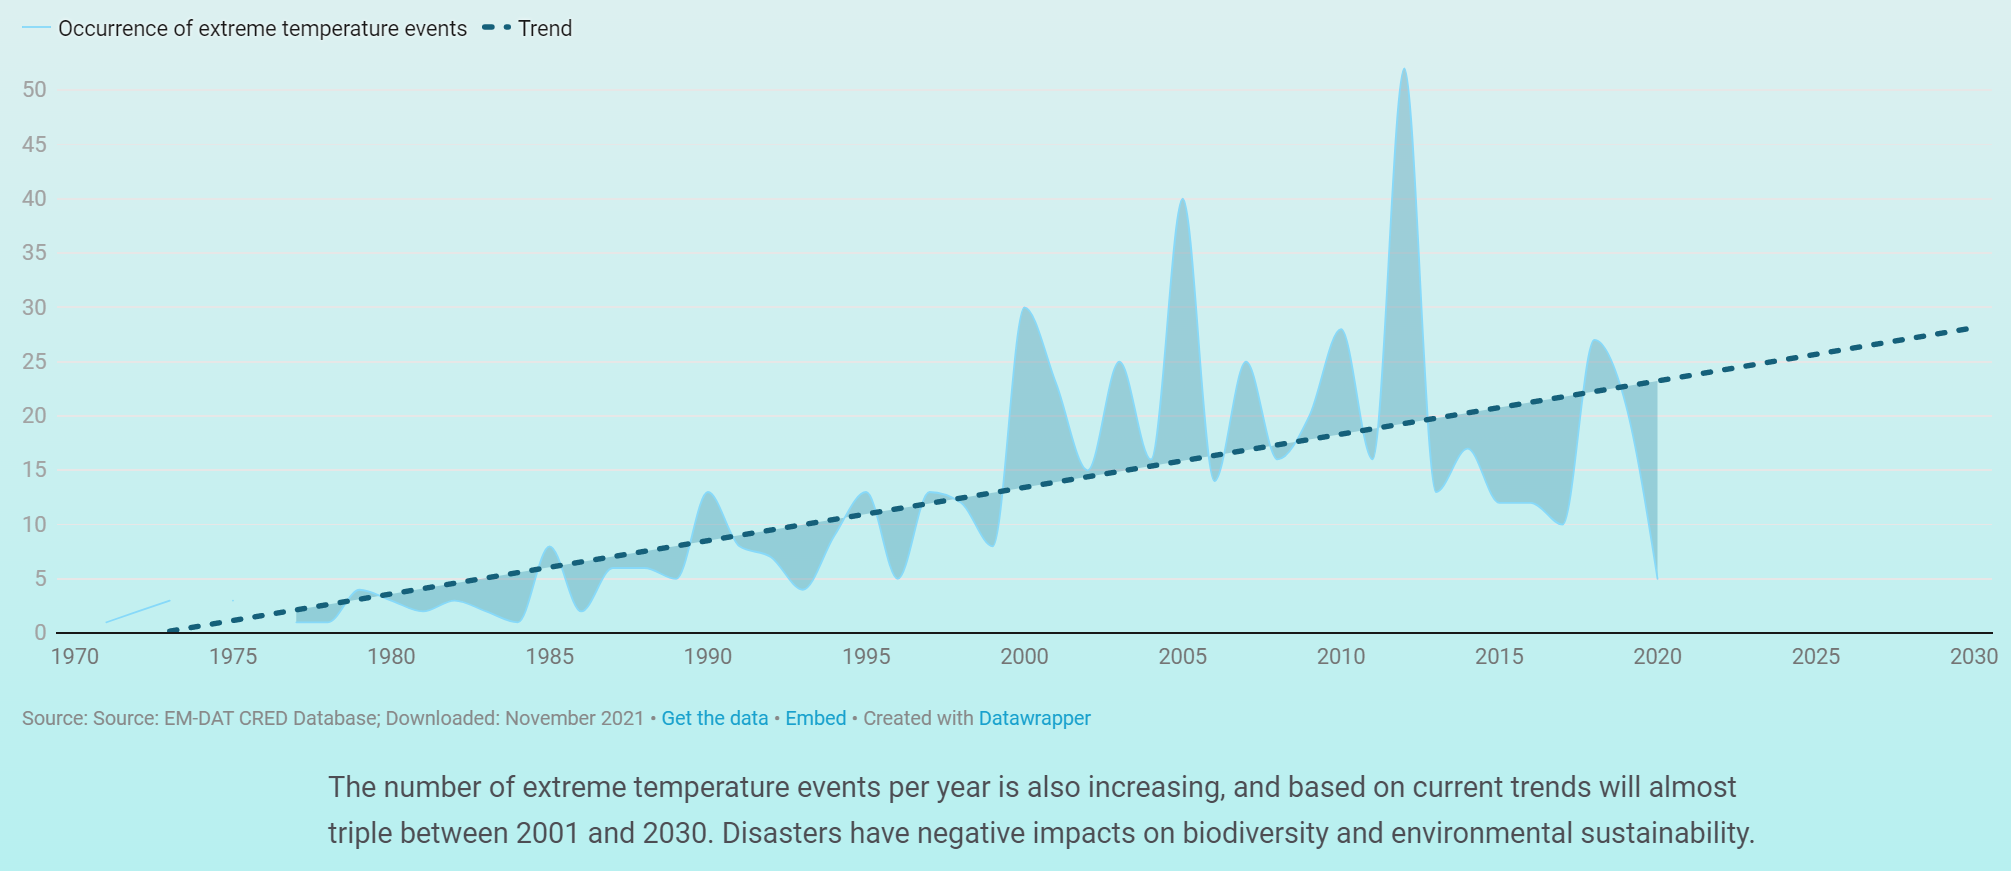 Occurrence of extreme temperature events, 1970-2021 and projected to 2030. Data: EM-DAT CRED Database, November 2021. The number of extreme temperature events per year is also increasing, and based on current trends will almost triple between 2001 and 2030. Disasters have negative impacts on biodiversity and environmental sustainability. Graphic: UNDRR